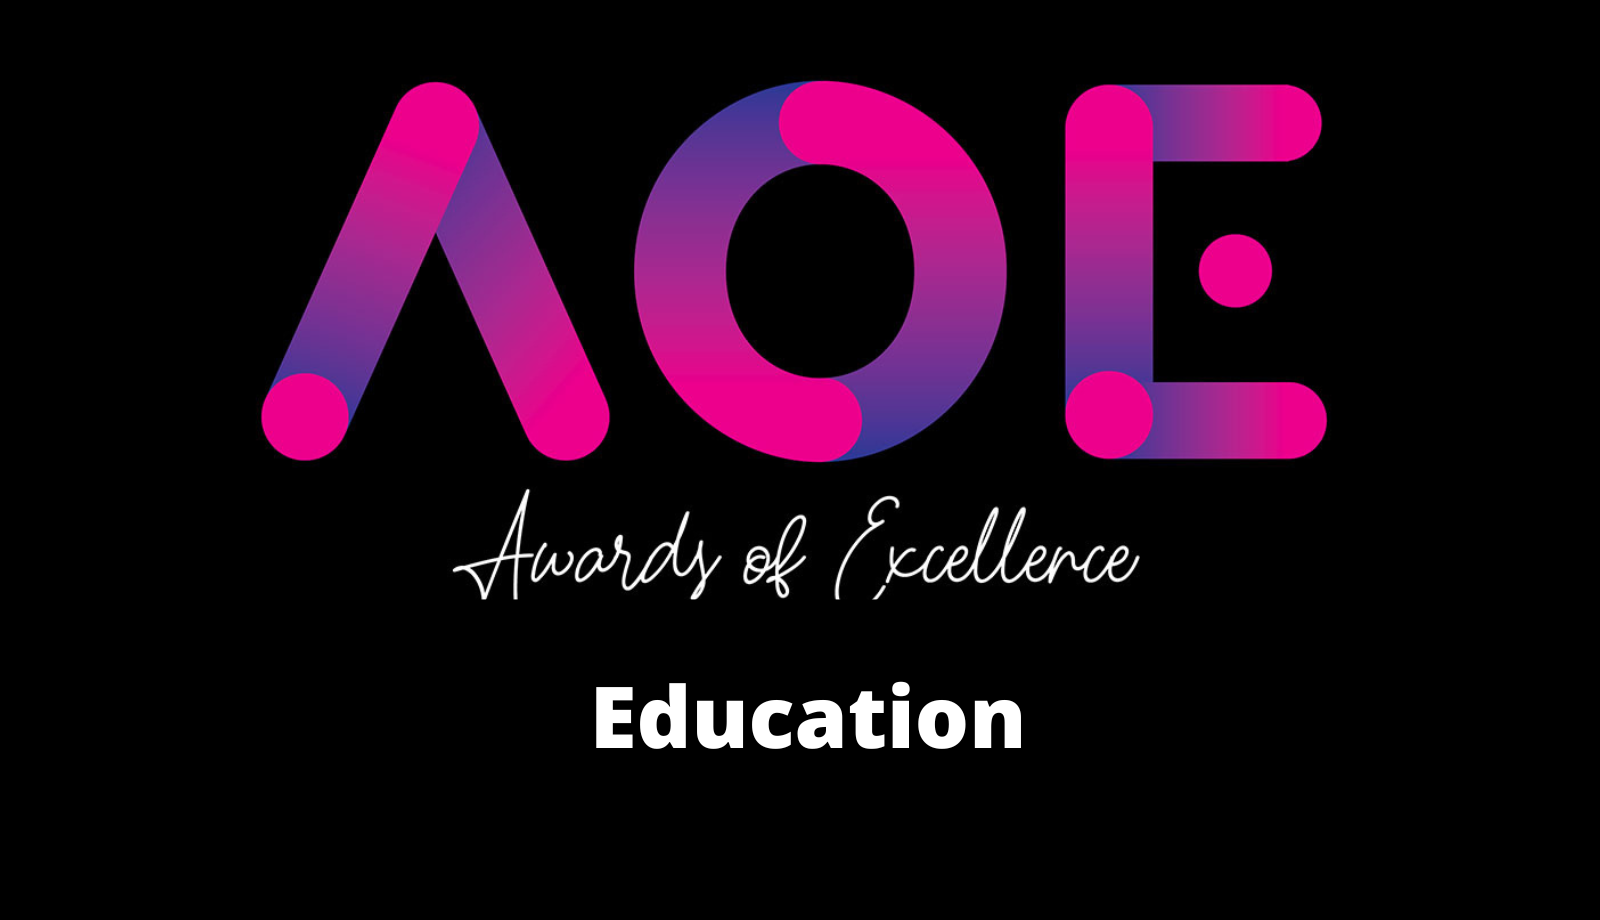 Outstanding Educators to Share Spotlight at Awards of Excellence